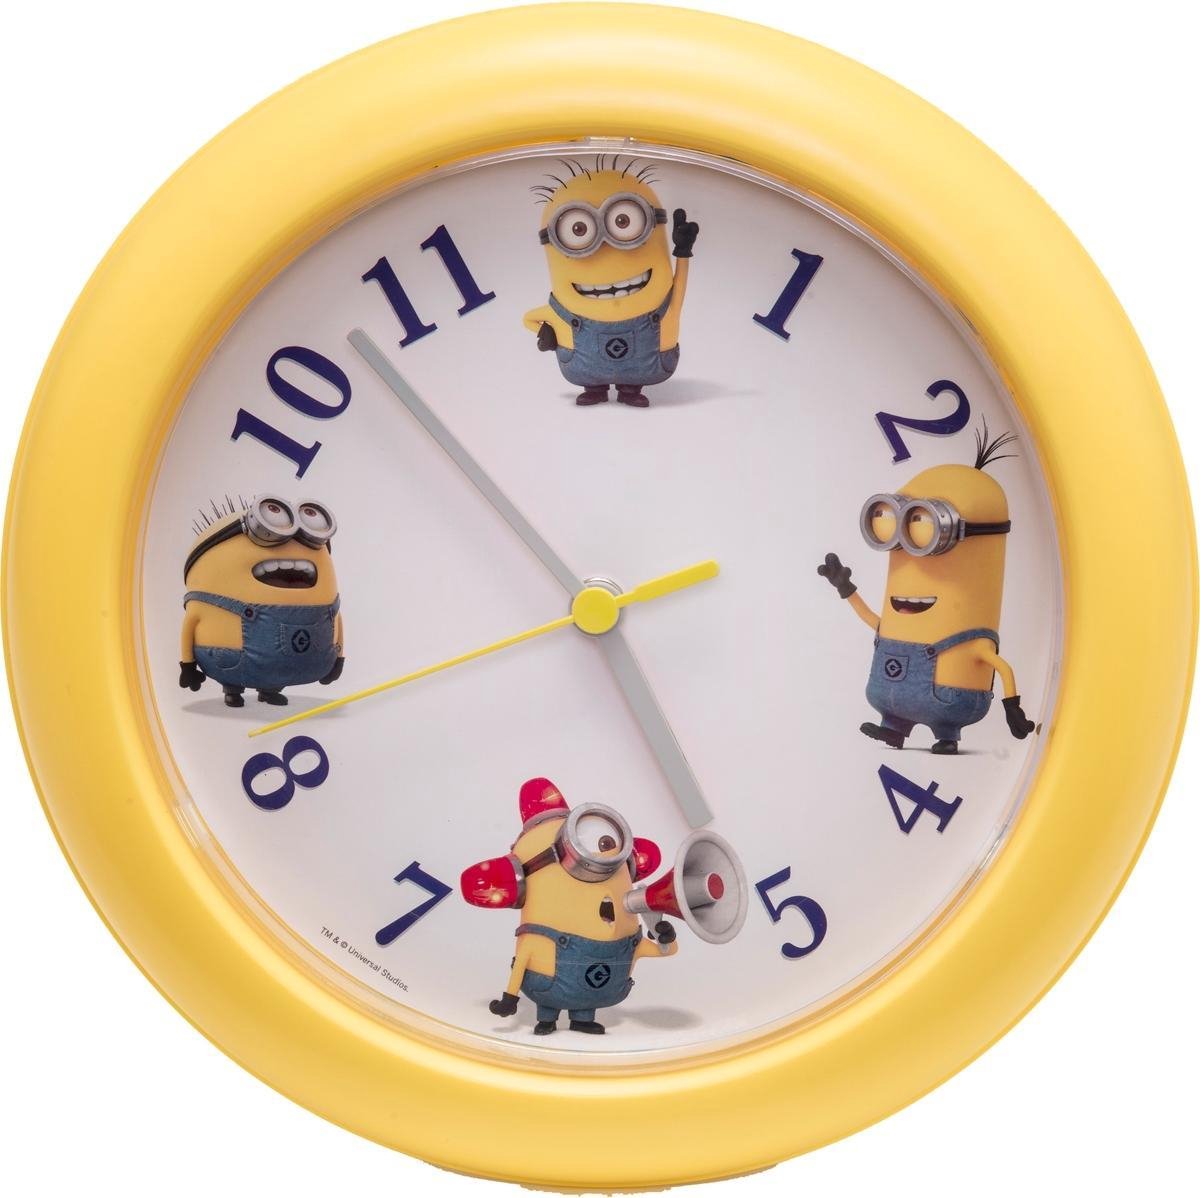 Minions 2 - Wall Clock with Sound 24cm